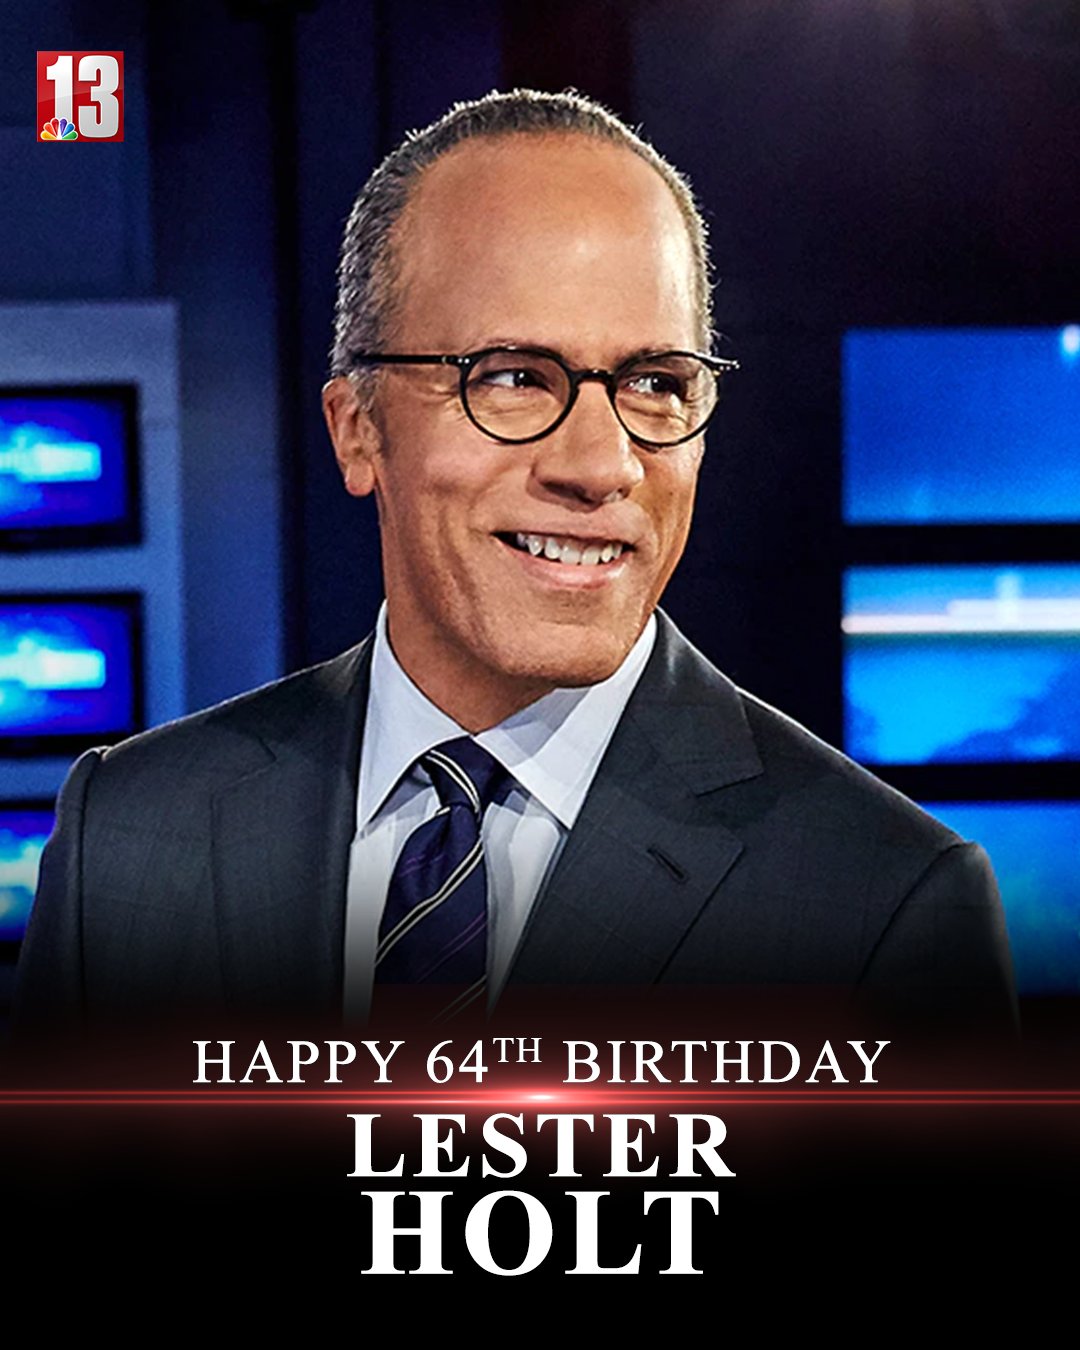   HAPPY 64th BIRTHDAY to with Lester Holt anchor -- 